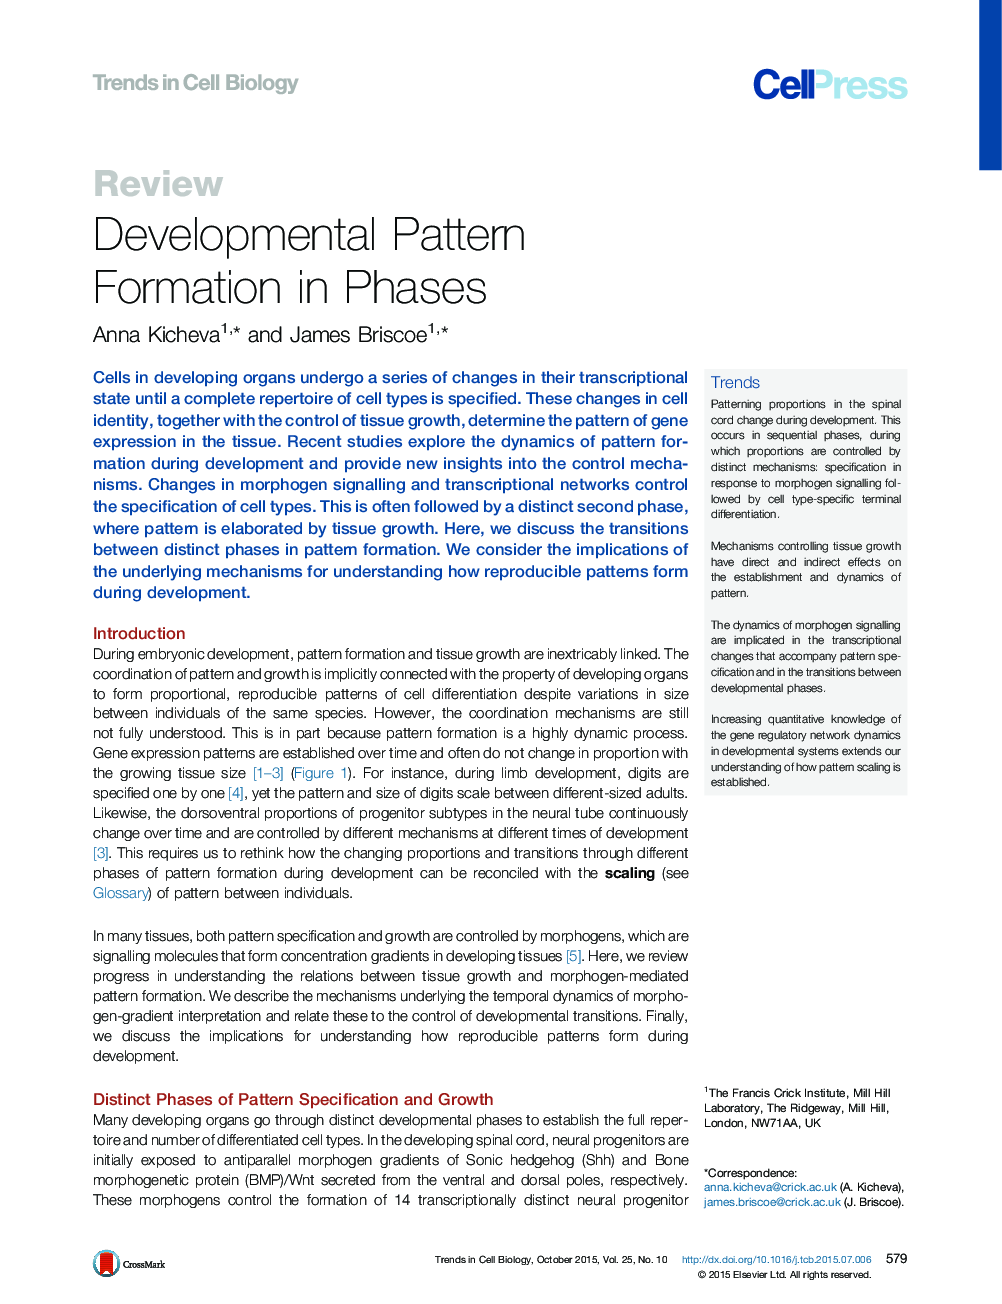 Developmental Pattern Formation in Phases